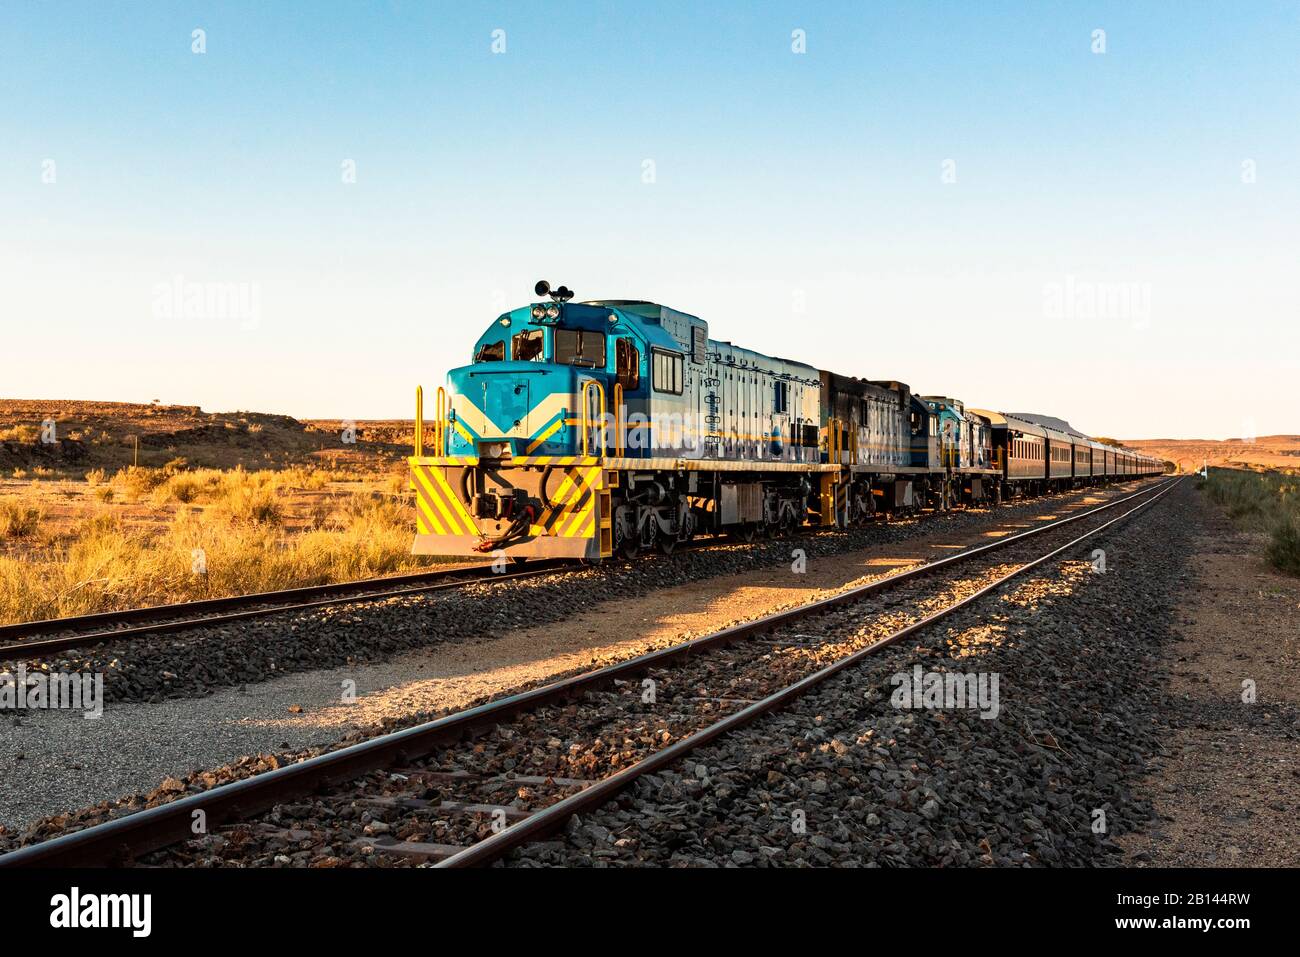 Train on tracks at sunrise in South Africa Stock Photo